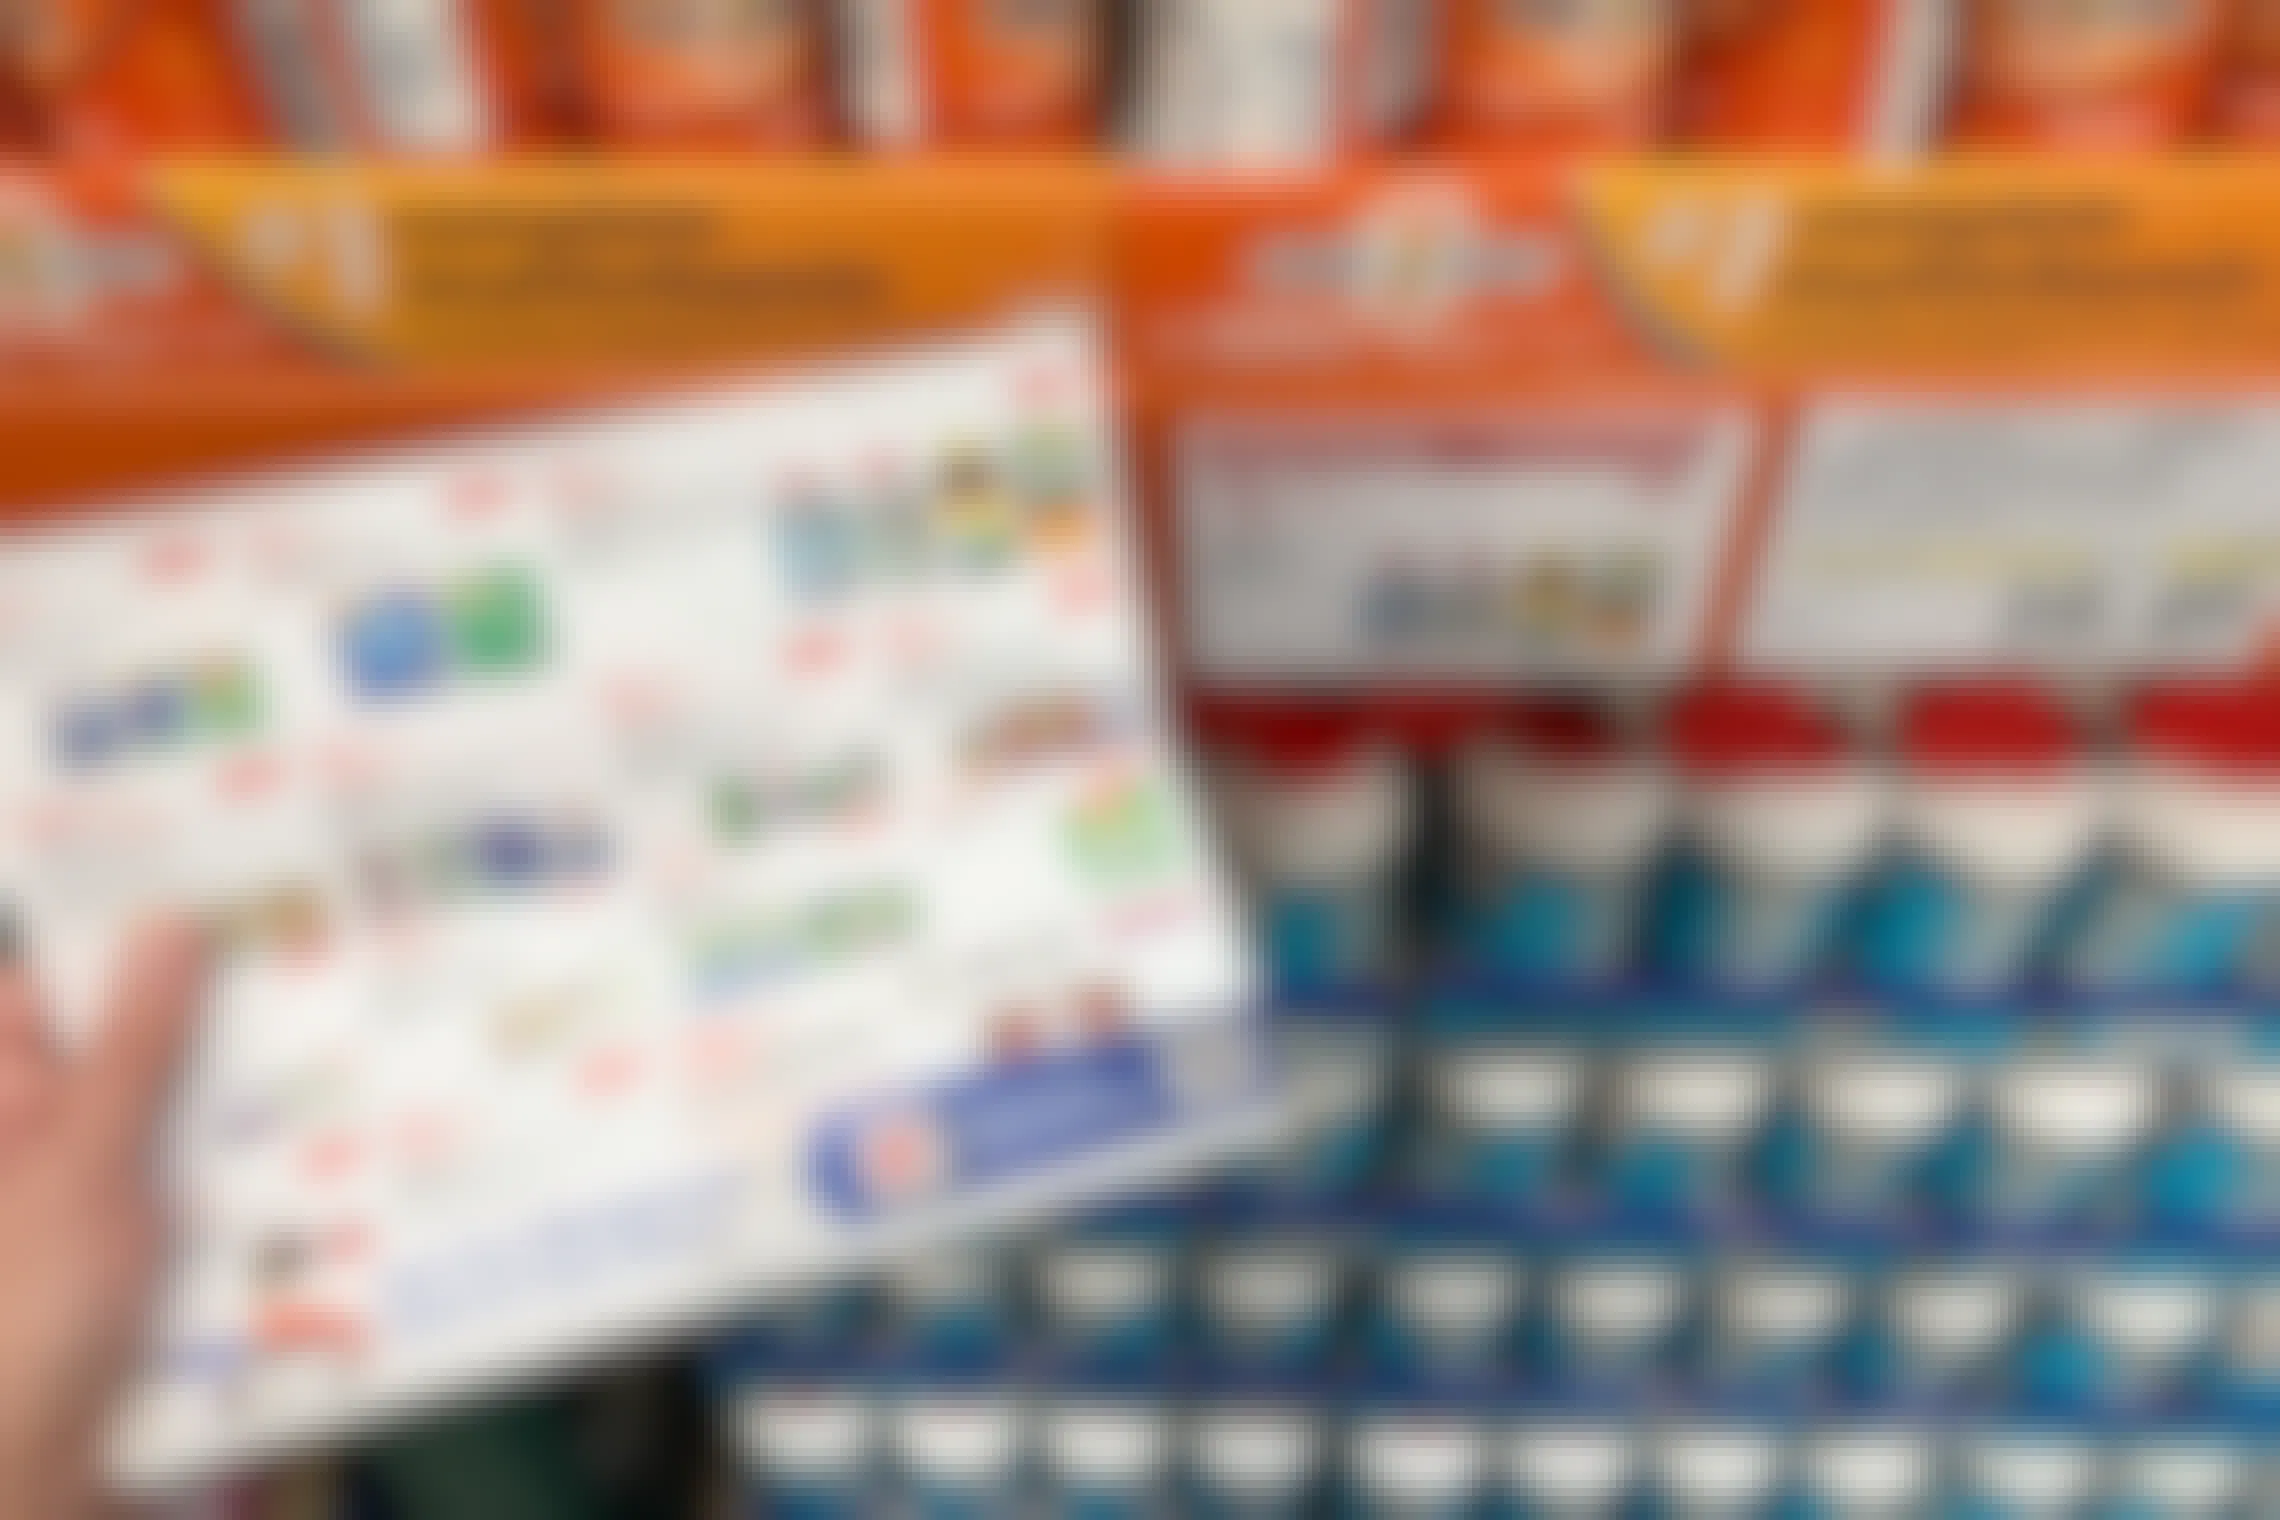 Costco coupon book with Kirkland vitamins on the page and the shelf behind it